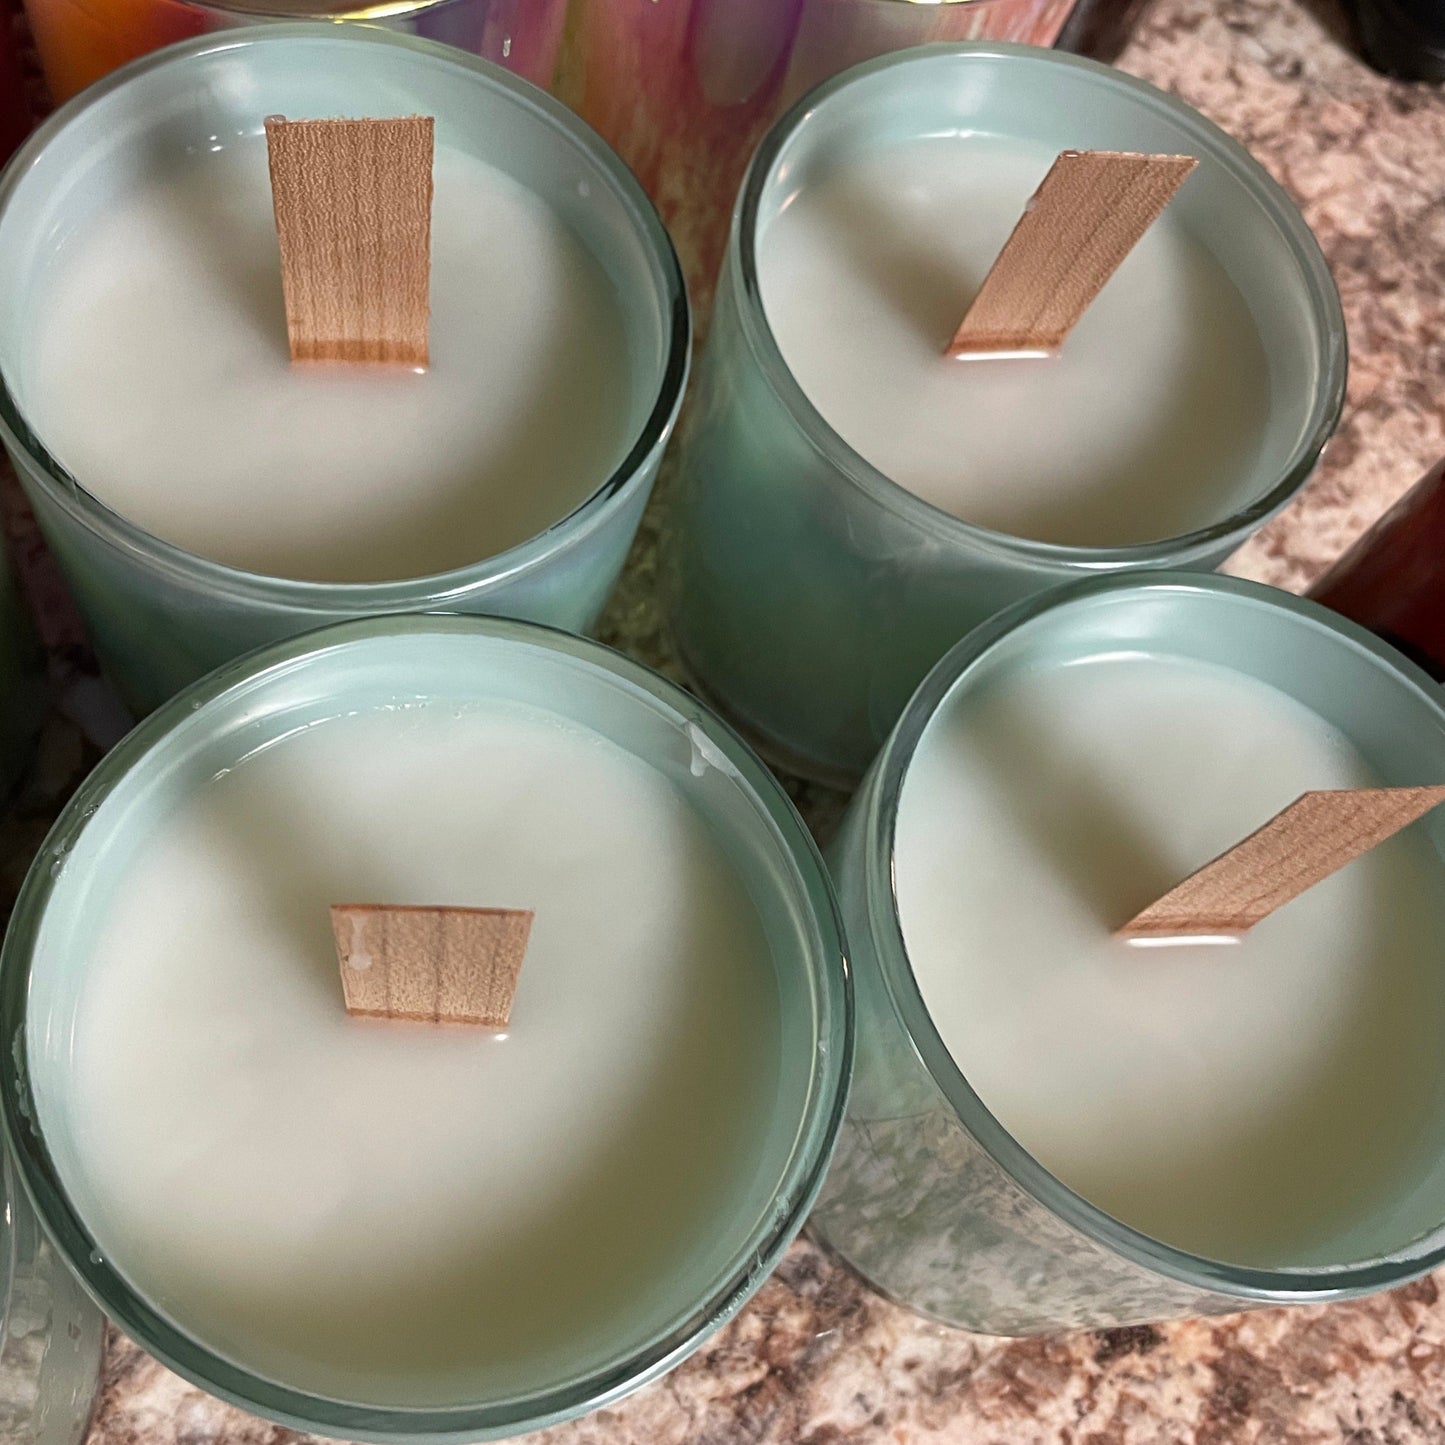 Beija Flor Type Candle made with Coco apricot creme wax and a crackling wooden wick